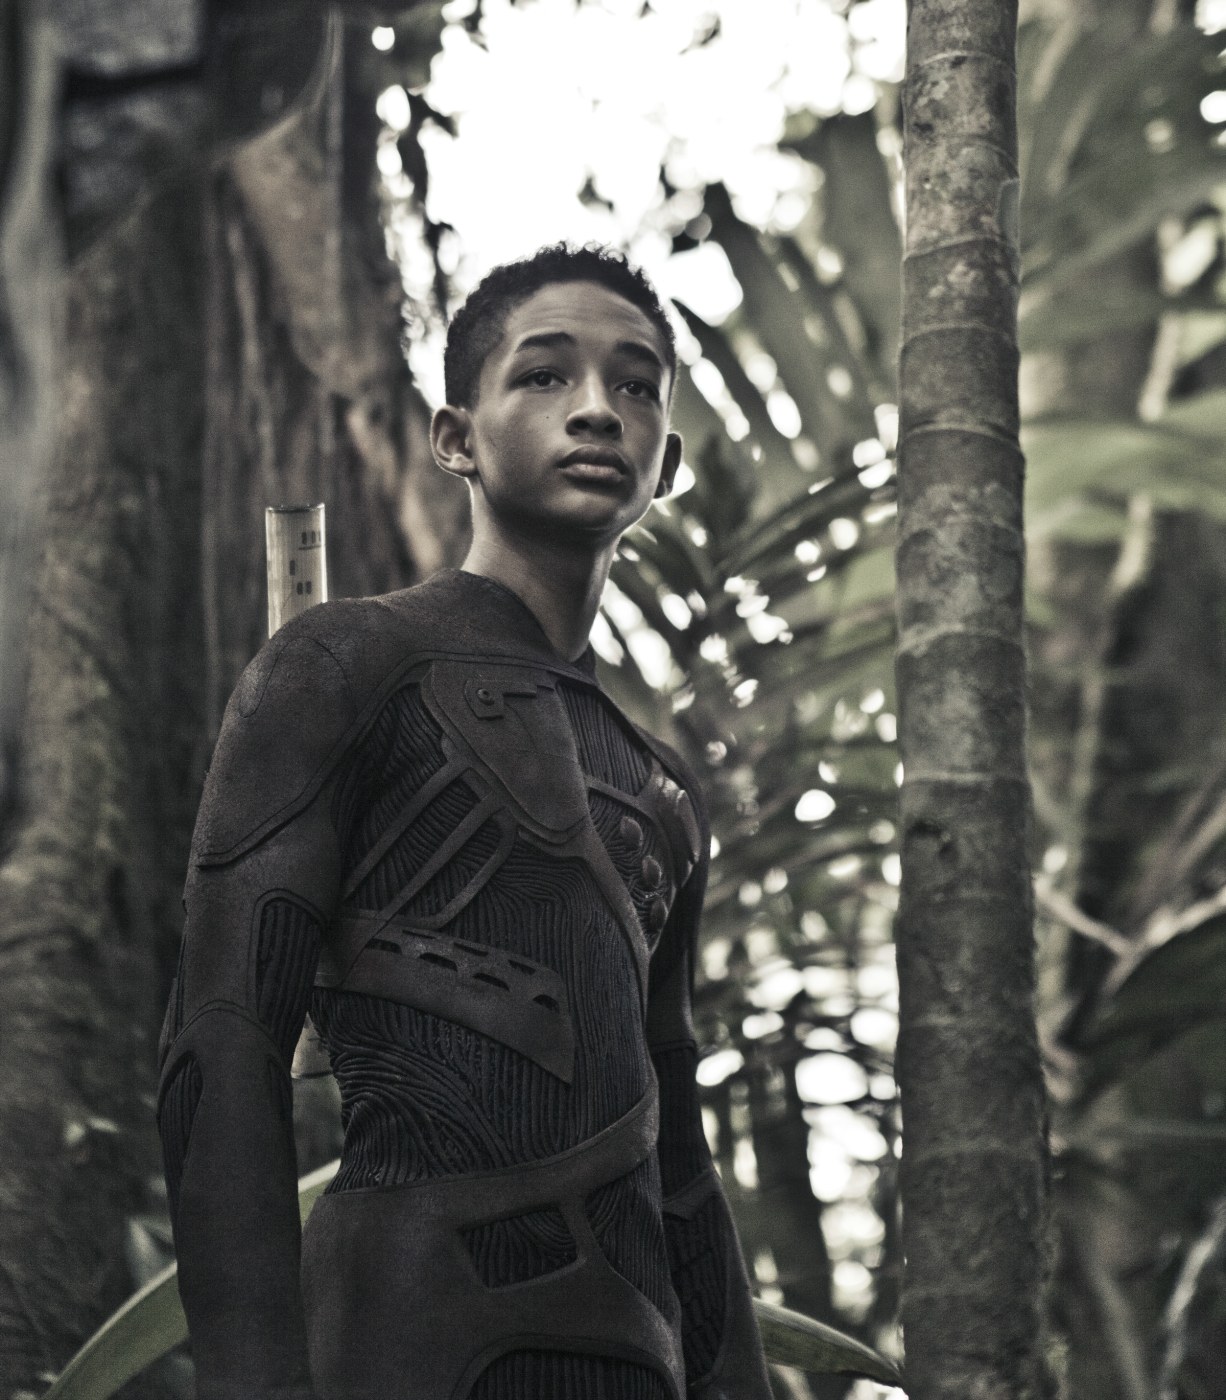 After Earth - Bild 1